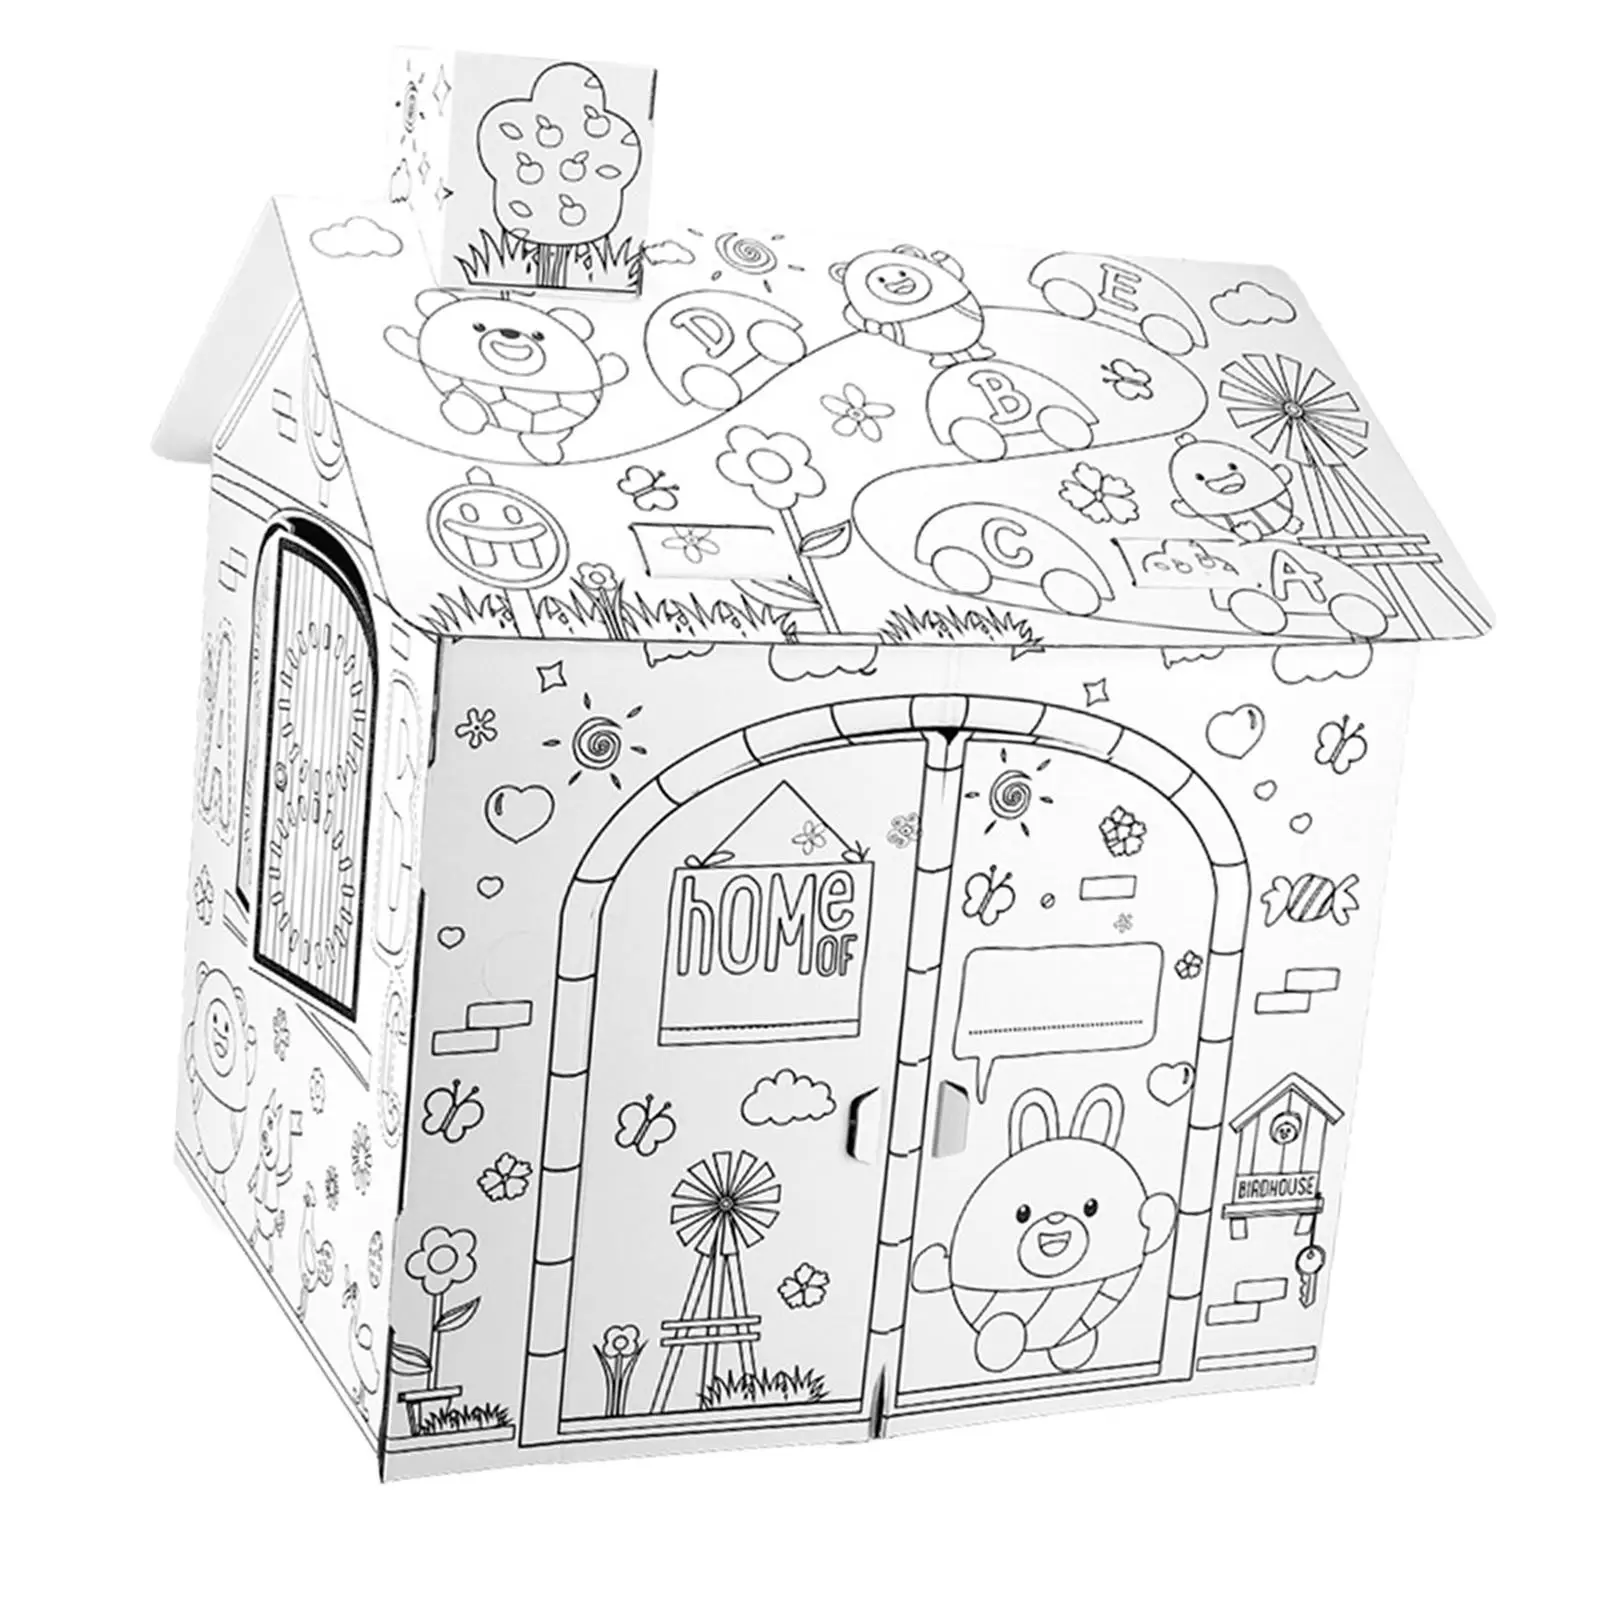 Paper Cardboard Playhouse Play House Early Educational Toys for Holiday Gifts